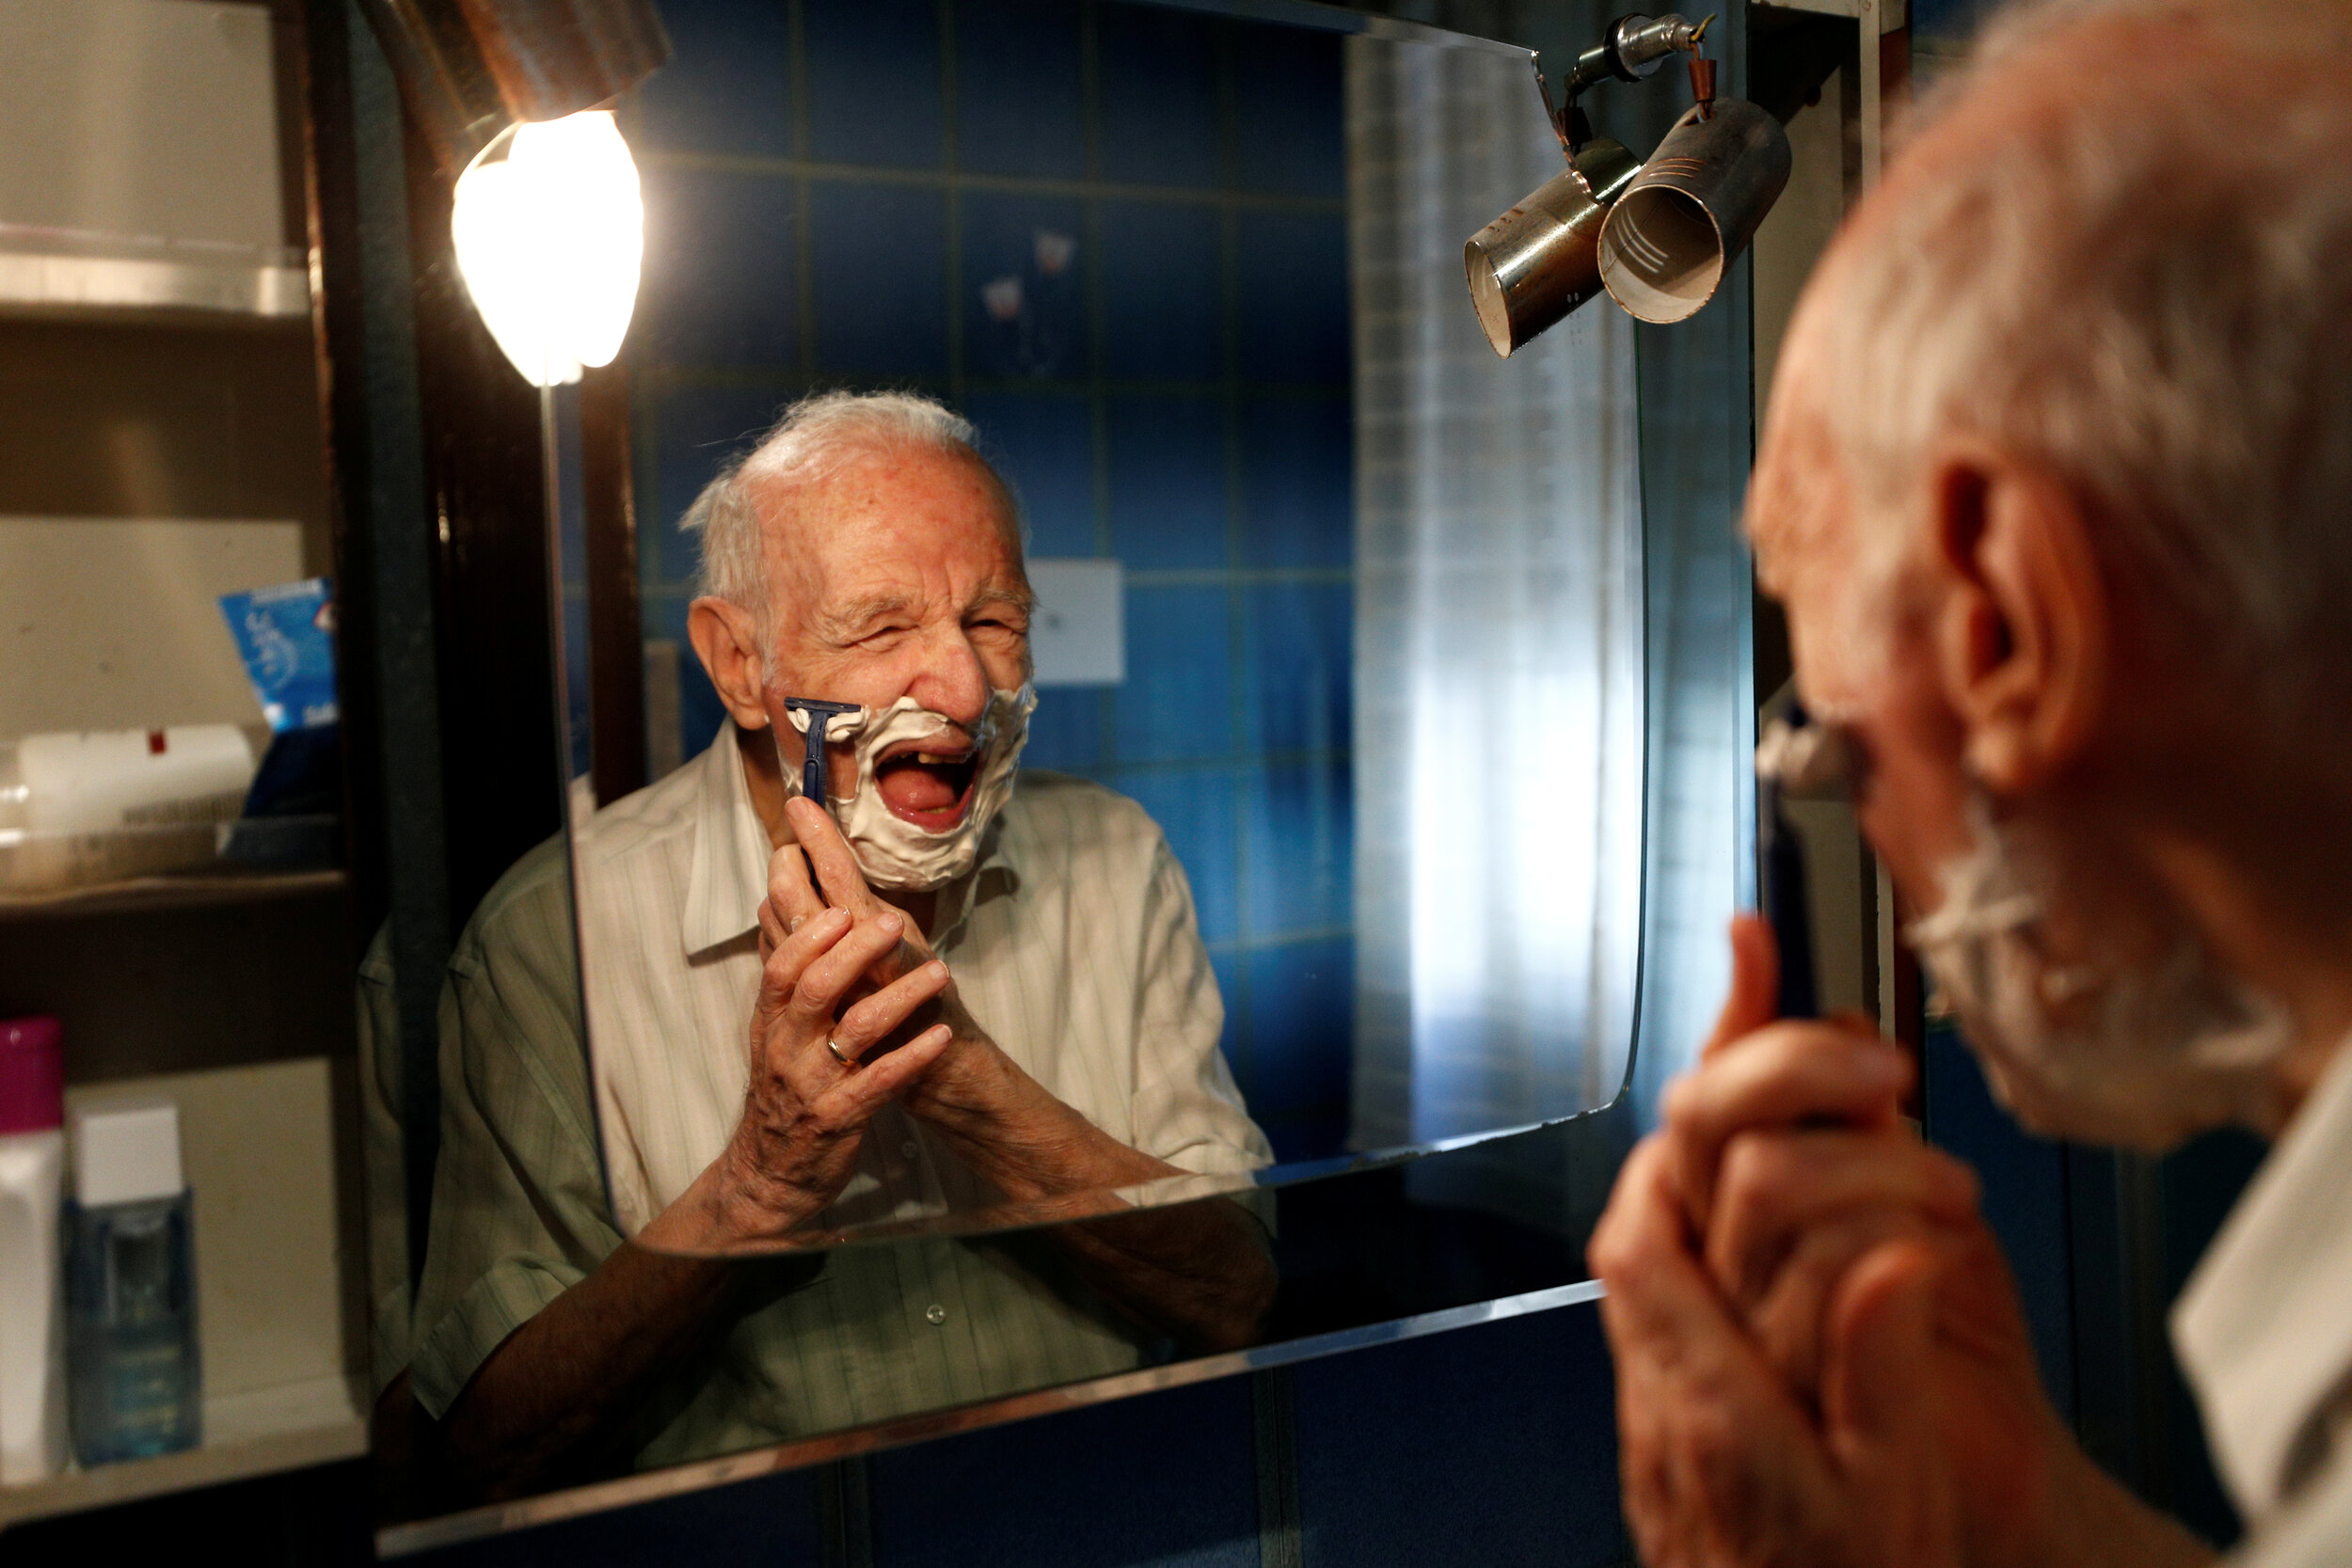  Giuseppe Paterno, 96, Italy's oldest student, shaves his beard as he gets ready for the day, two days before he graduates from The University of Palermo with an undergraduate degree in history and philosophy, at his home in Palermo, Italy, July 27, 